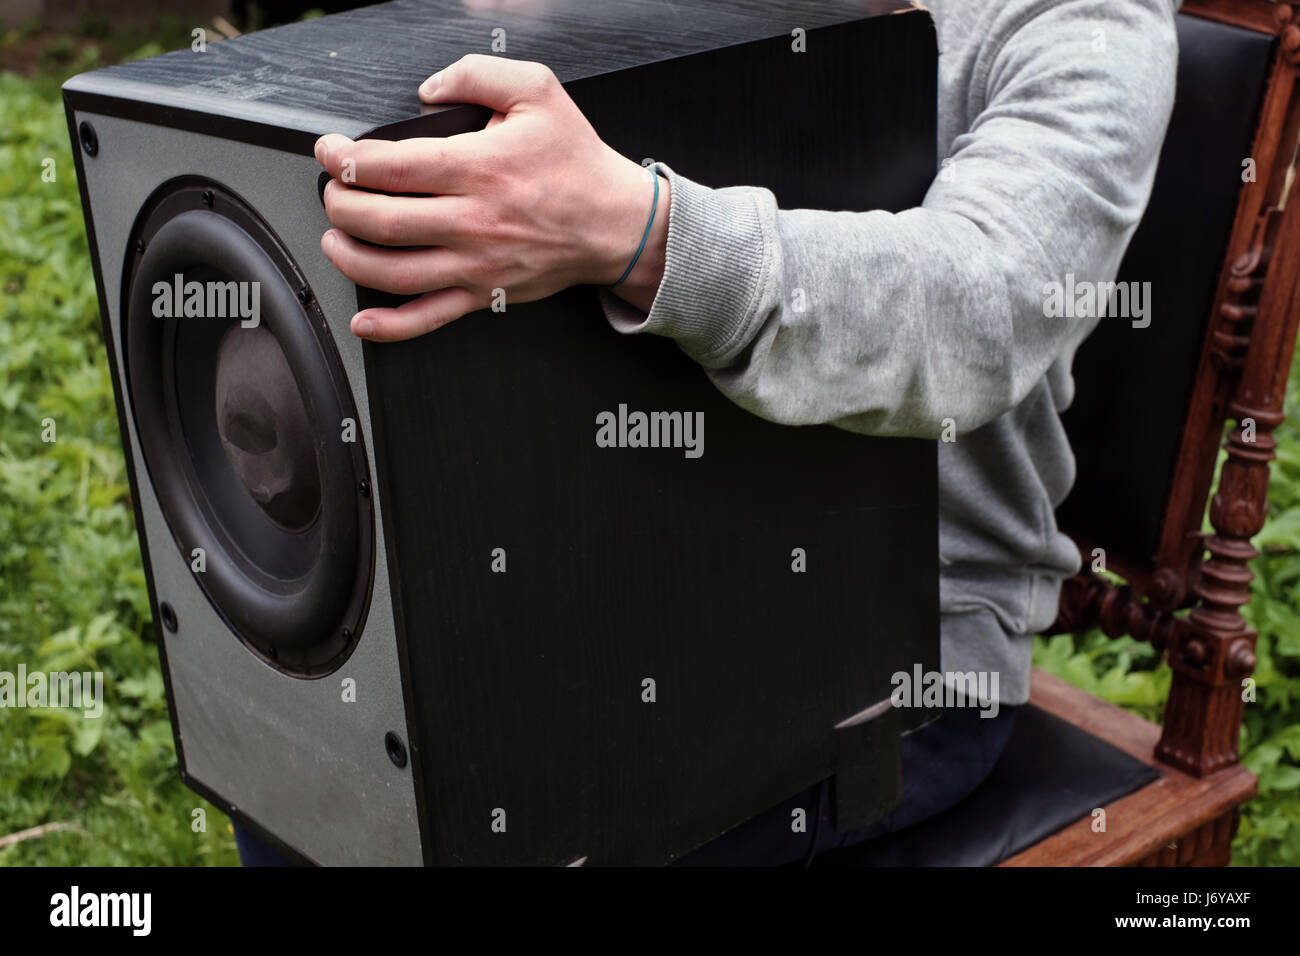 Man With Subwoofer Stock Photo